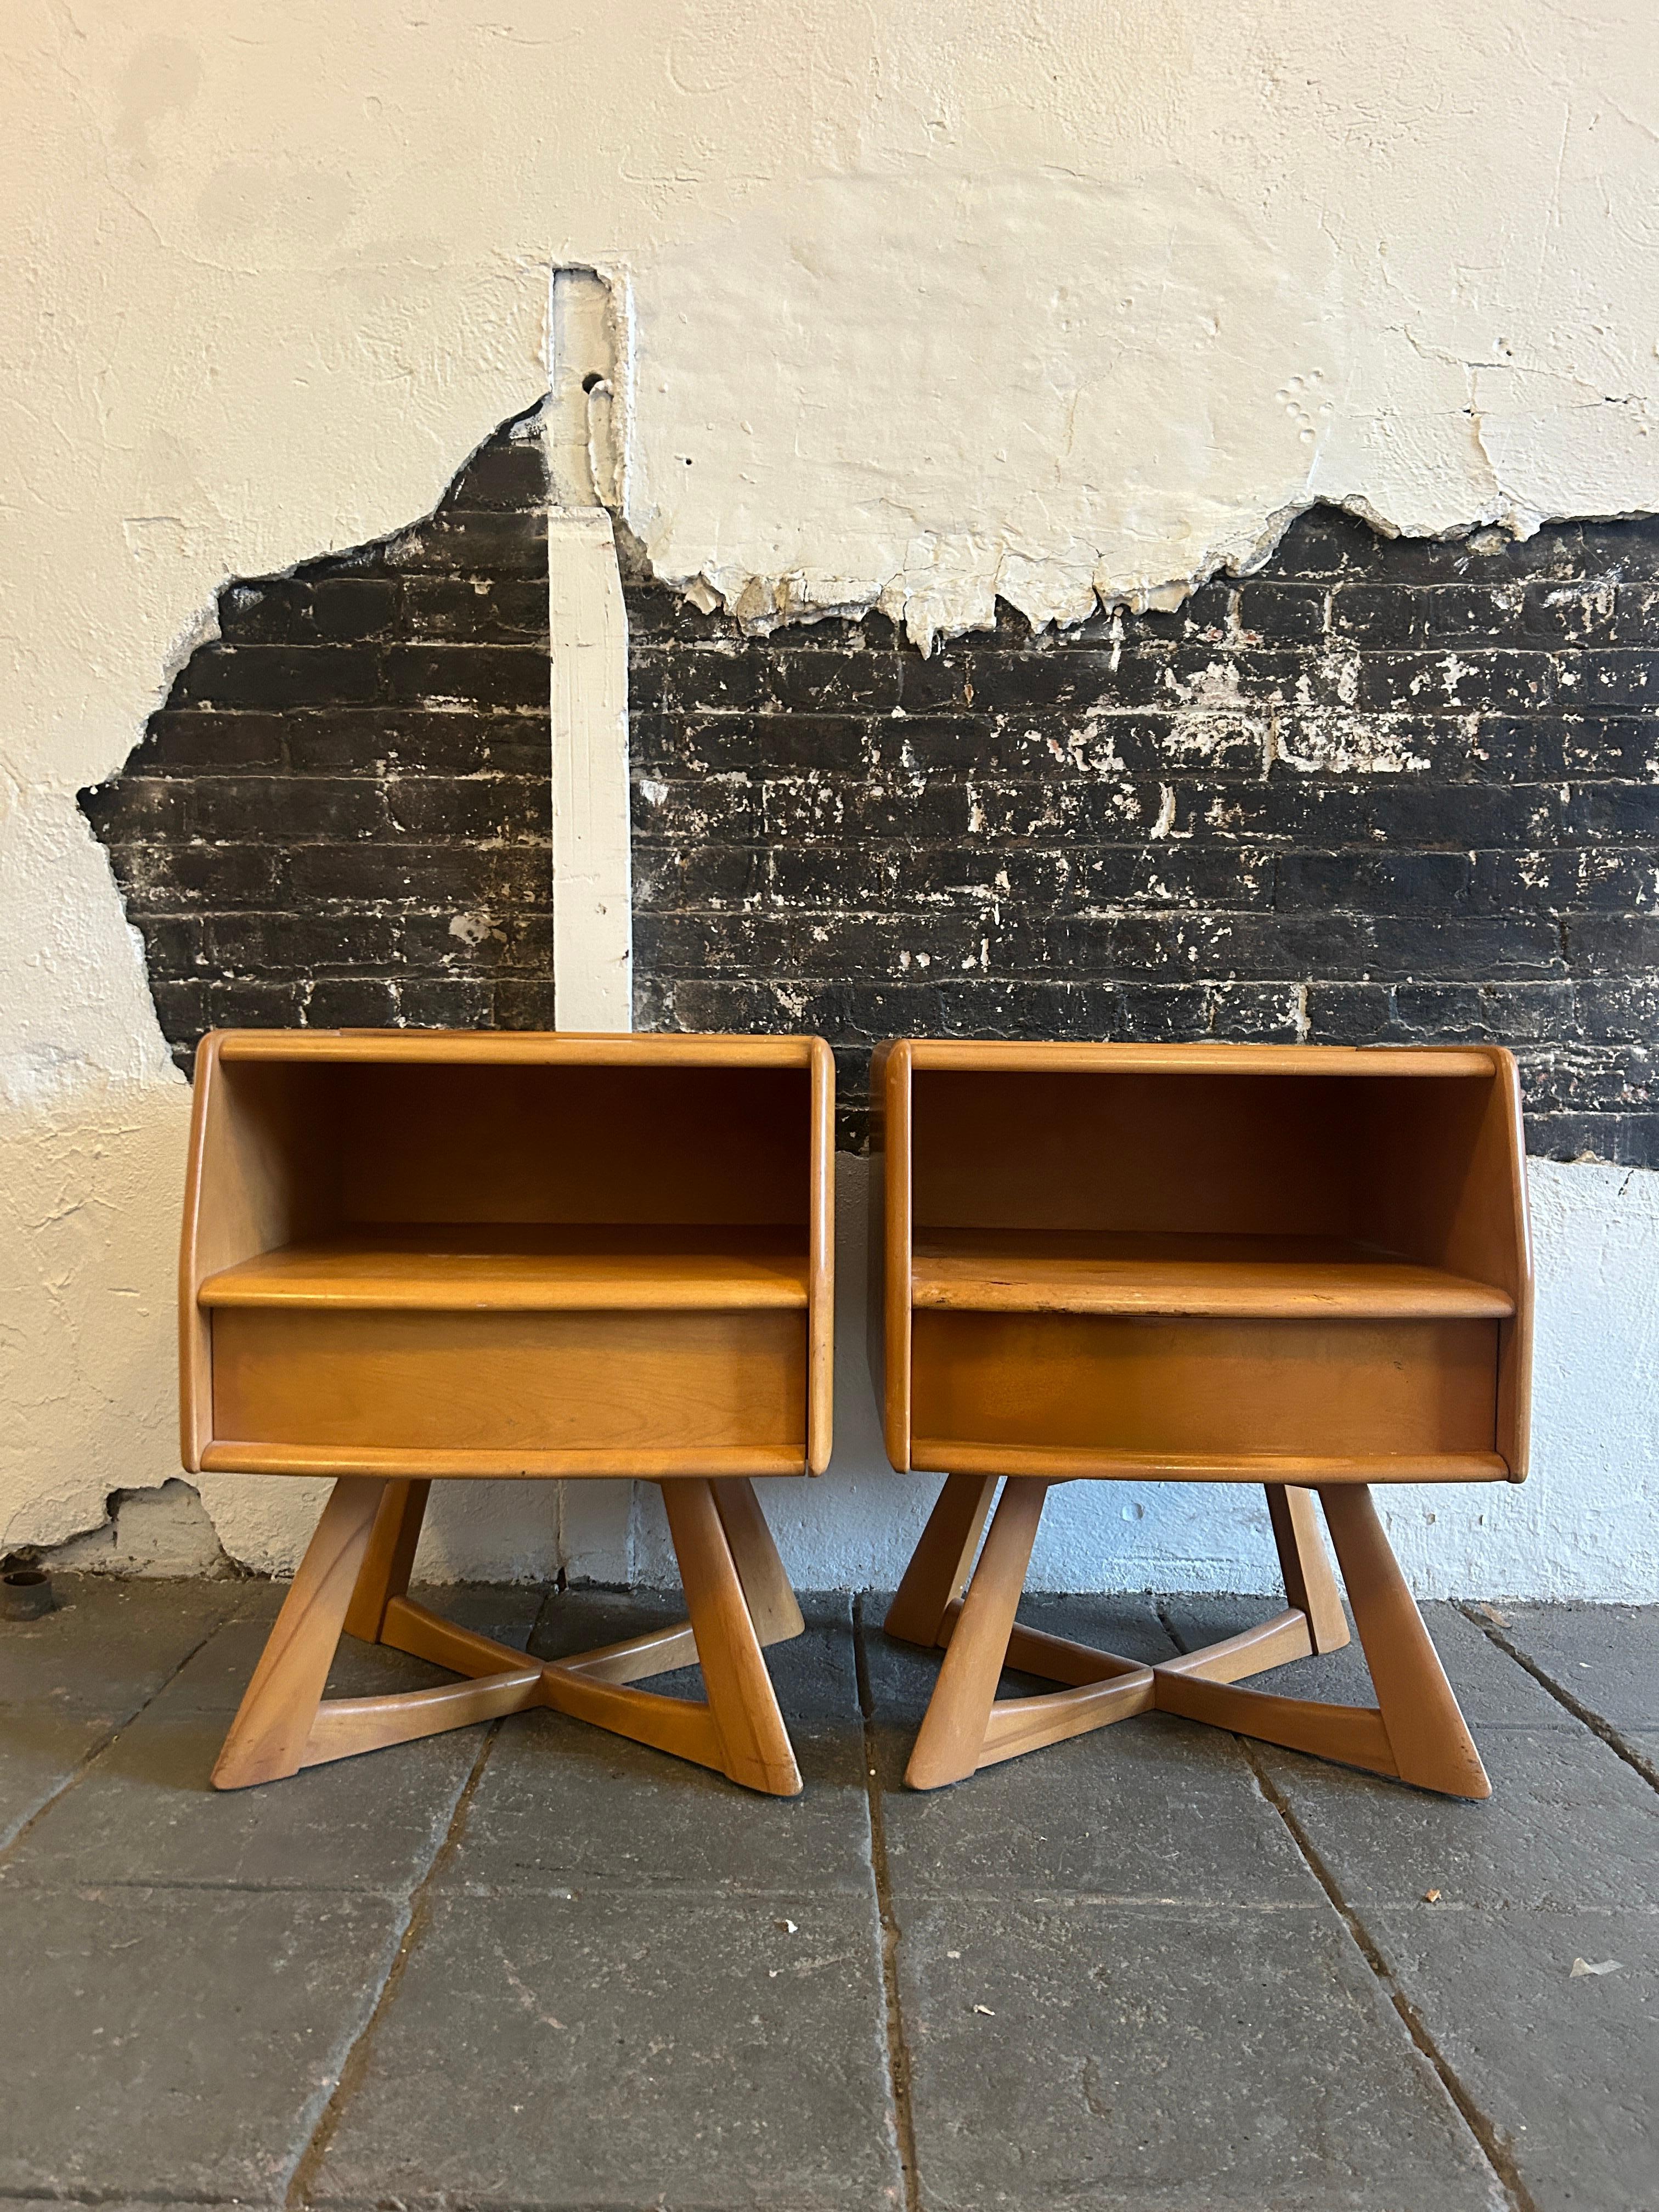 Timeless pair of Heywood Wakefield Mid-Century Modern single drawer nightstands. All solid maple construction with sculpted X base and curved front. Good vintage condition original blonde finish. Circa 1950 - Located in Brooklyn NYC.

Measures 24